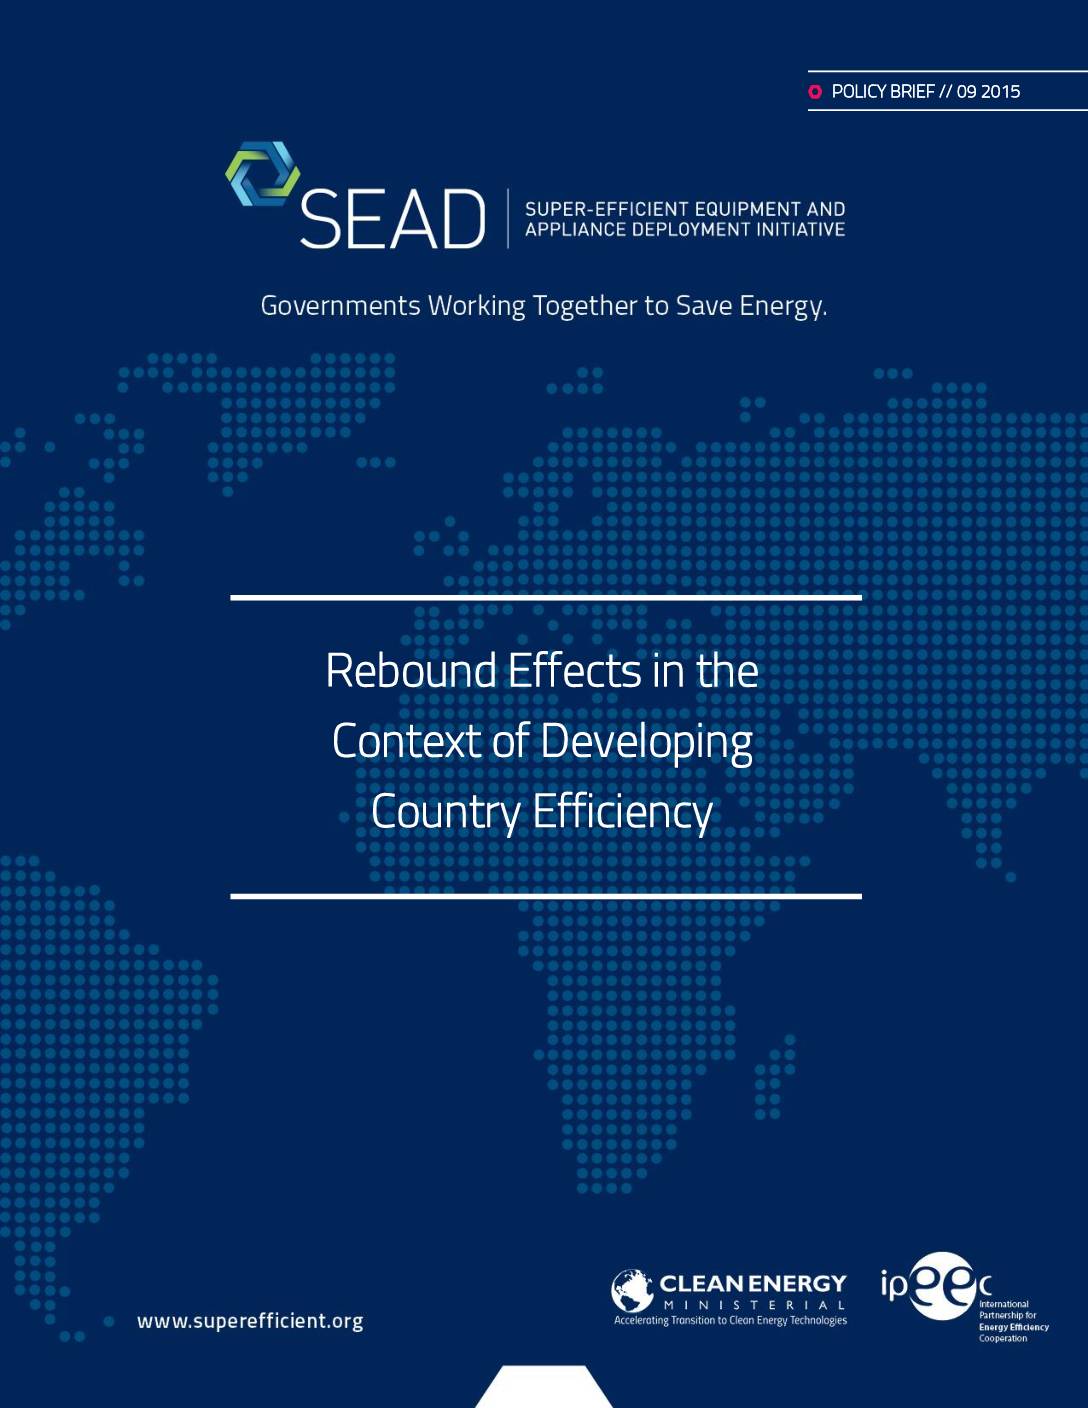 Rebound Effects and Developing Countries